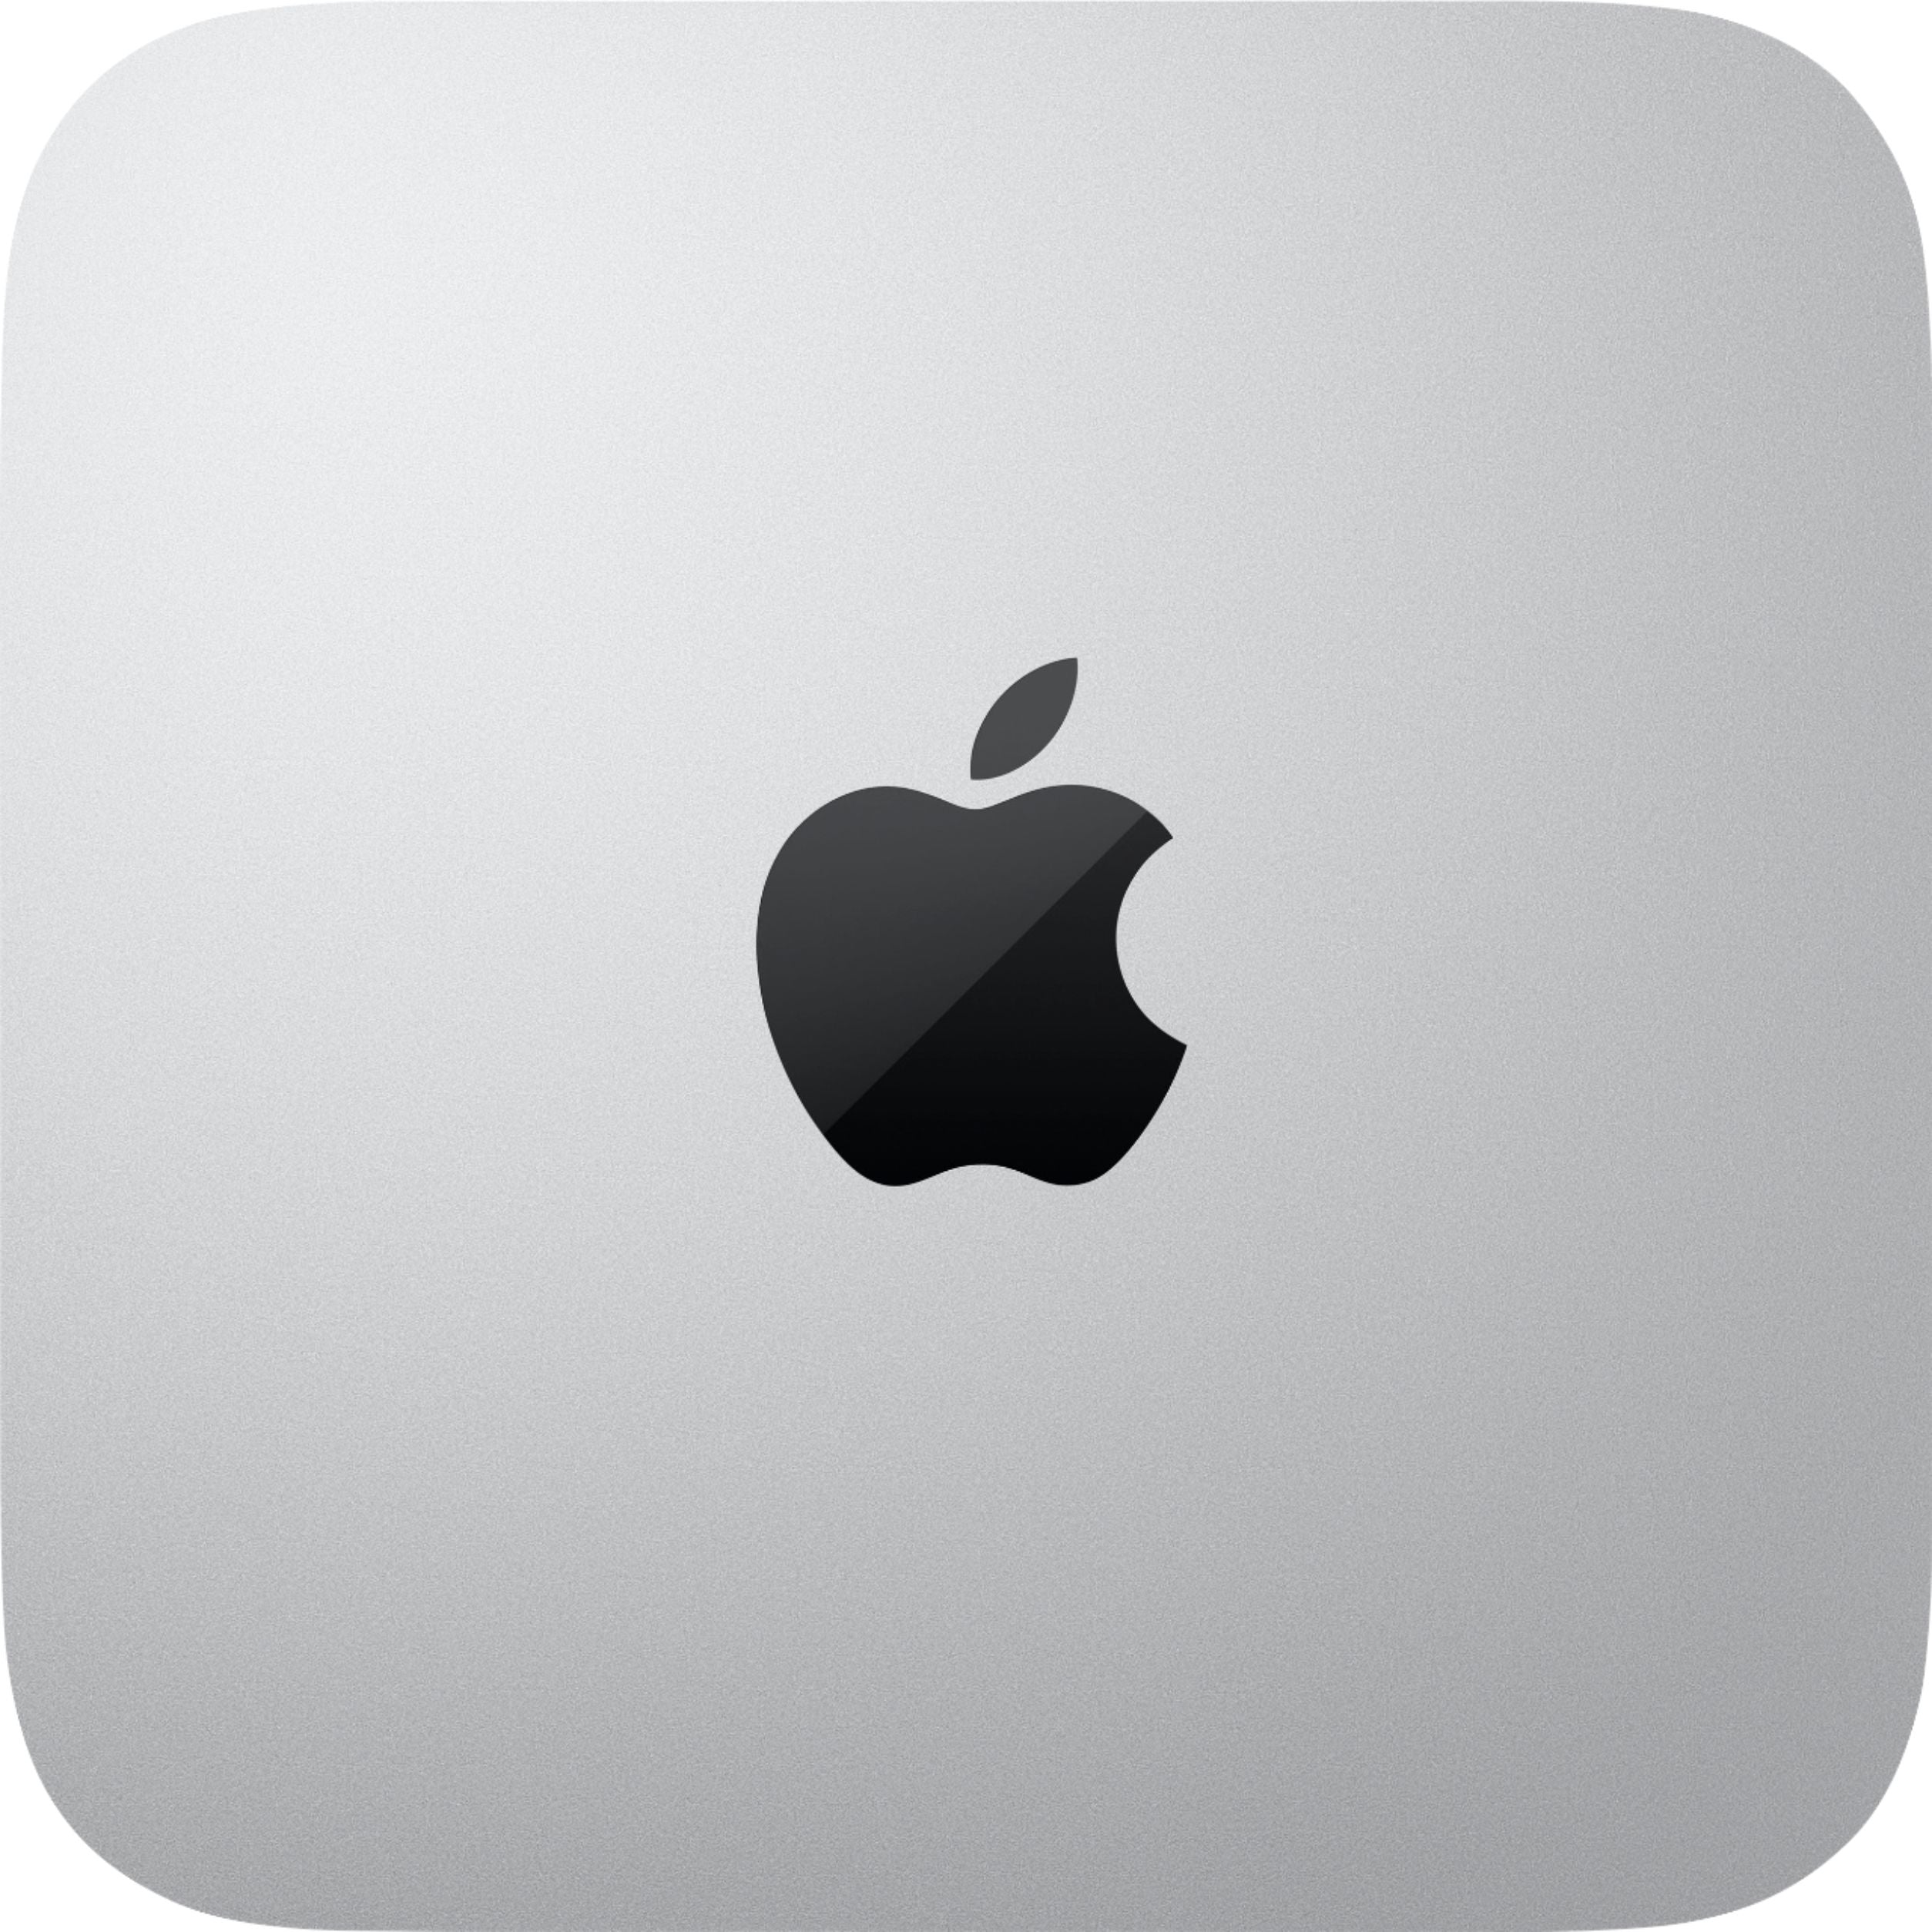 Apple Mac mini (M1 2020) Specifications, Technical Details & Price in India